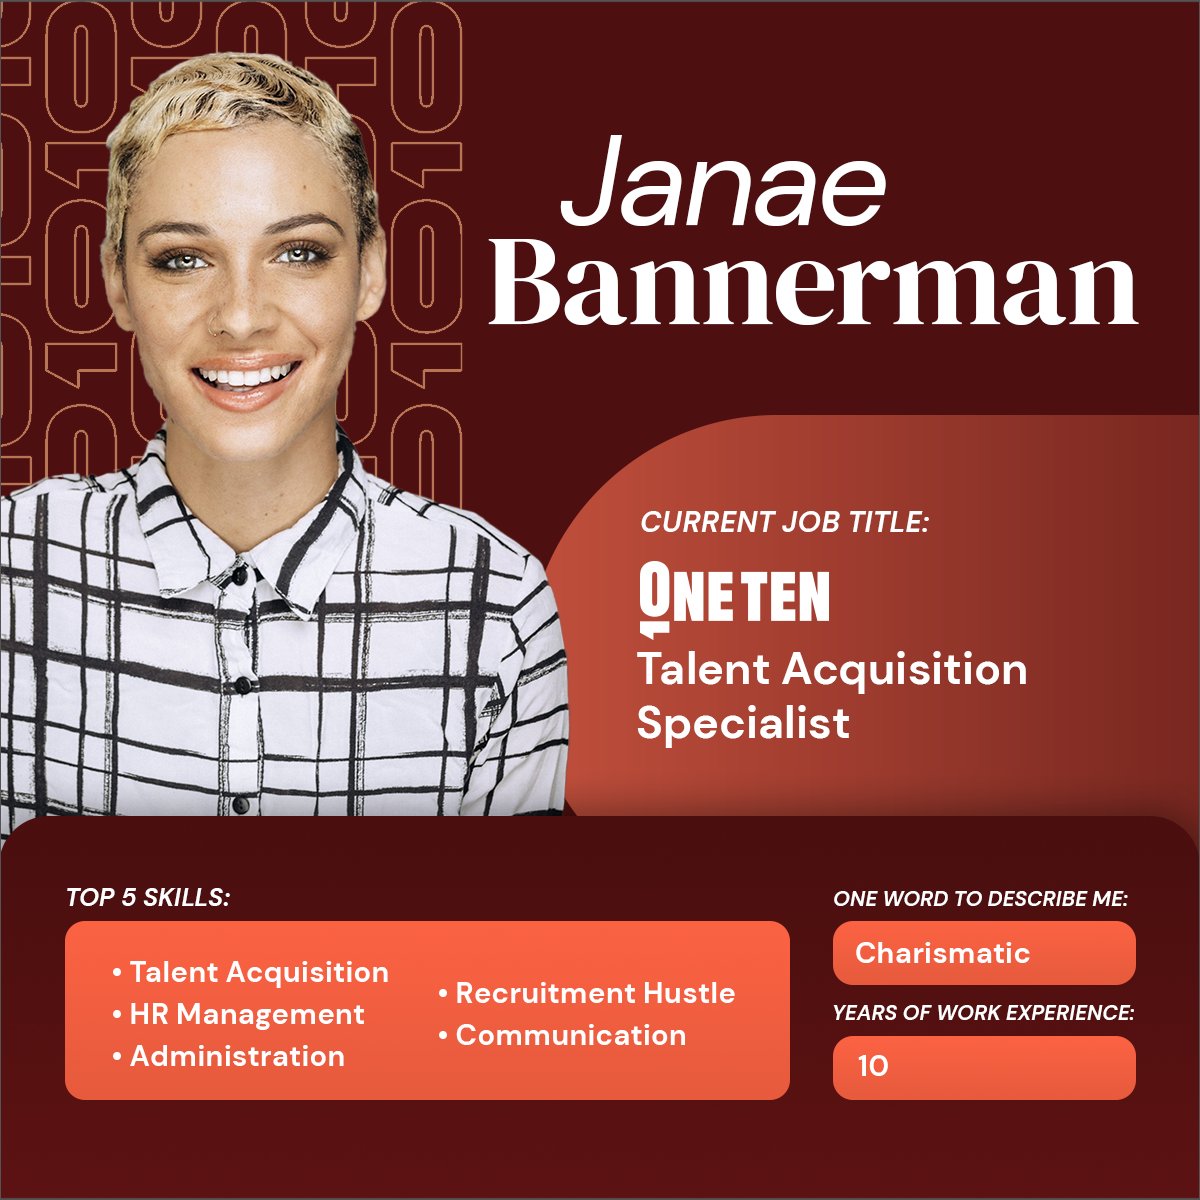 Meet Janae Bannerman, Talent Acquisition Specialist here at @Oneten. Janae’s skills come not from a traditional four-year degree, but invaluable experience working in HR across multiple industries. Success stories' like Janae’s are what happens when you #HireSkillsFirst!